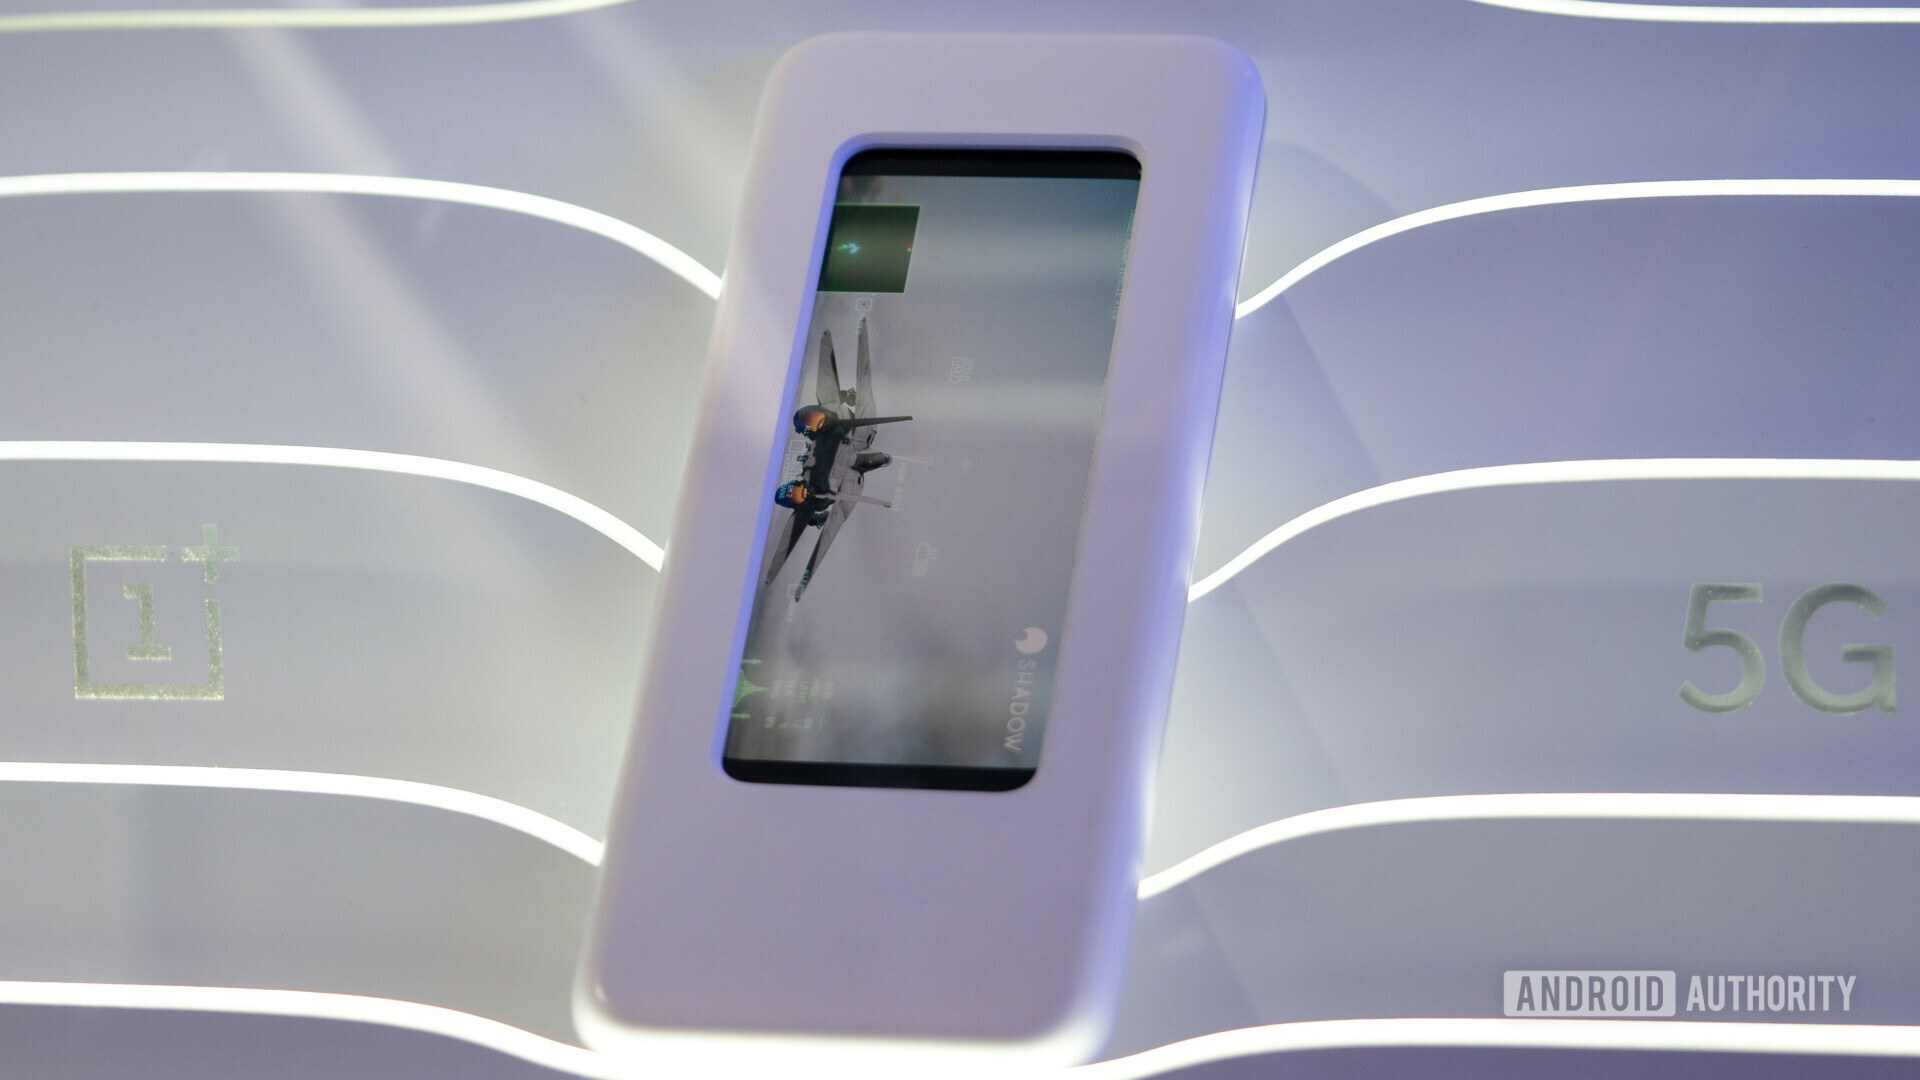 An image of the OnePLus 5G smartphone prototype in a concealing case at Mobile World Congress 2019.